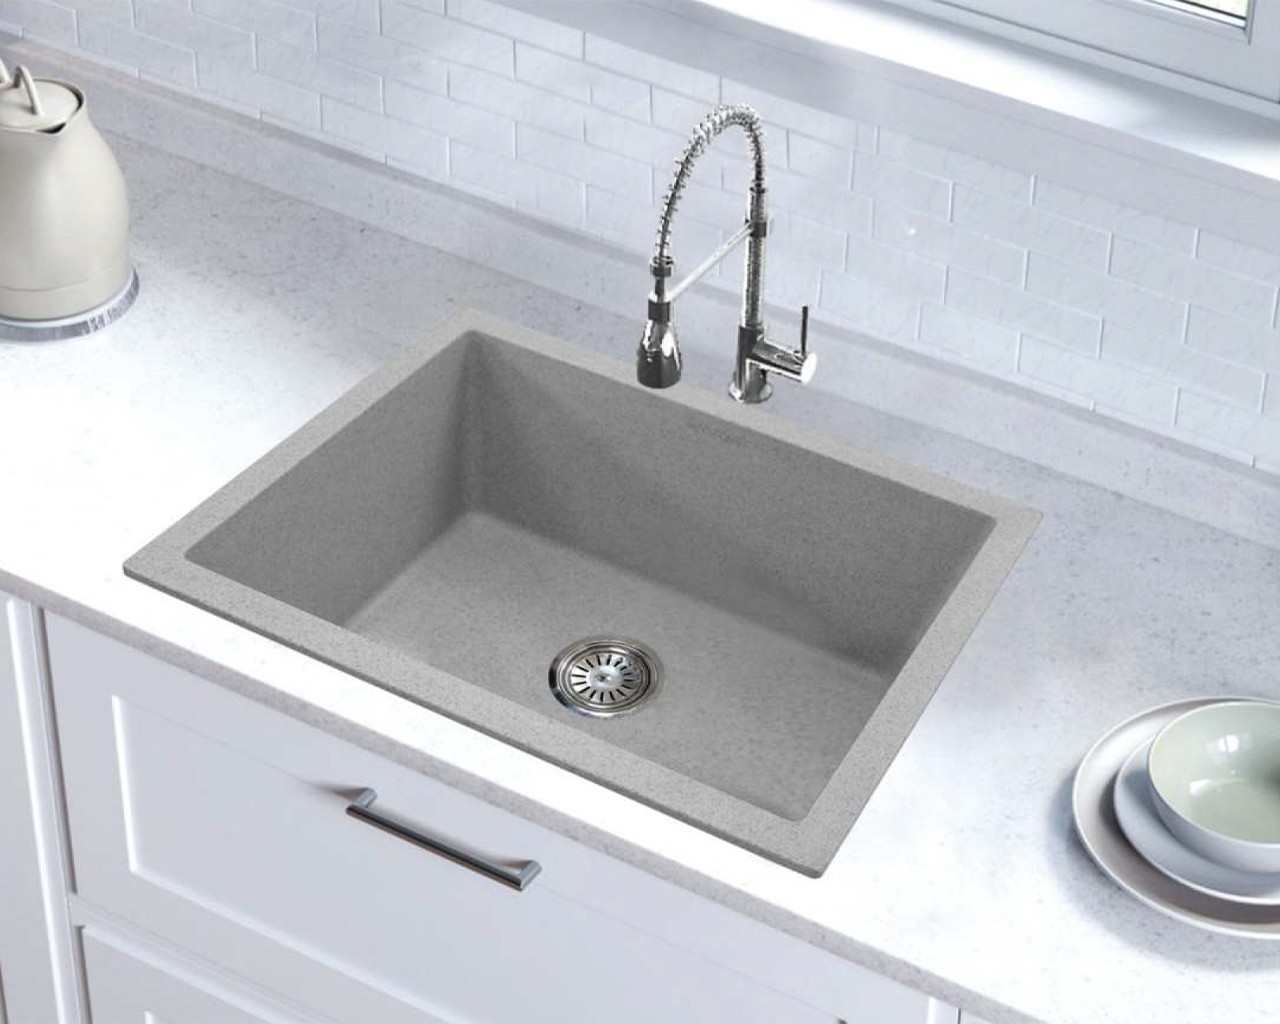 Things to Consider When Selecting a Kitchen Faucet